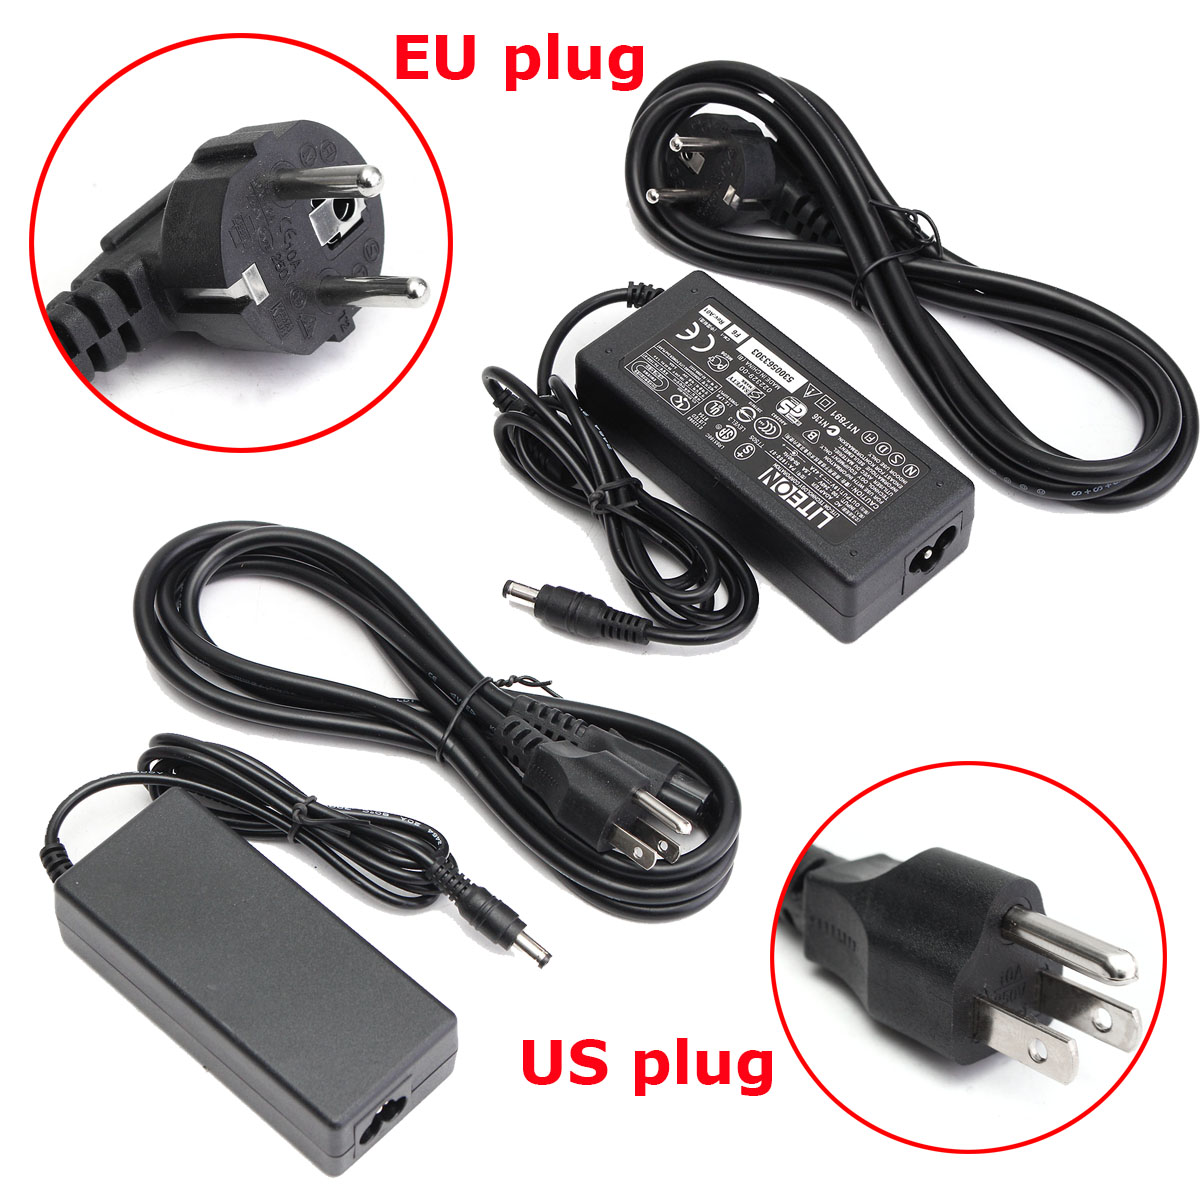 DC-19V-342A--Power-Adapter-Universal-Power-Supply-Charger-USEU-Plug-1363367-1